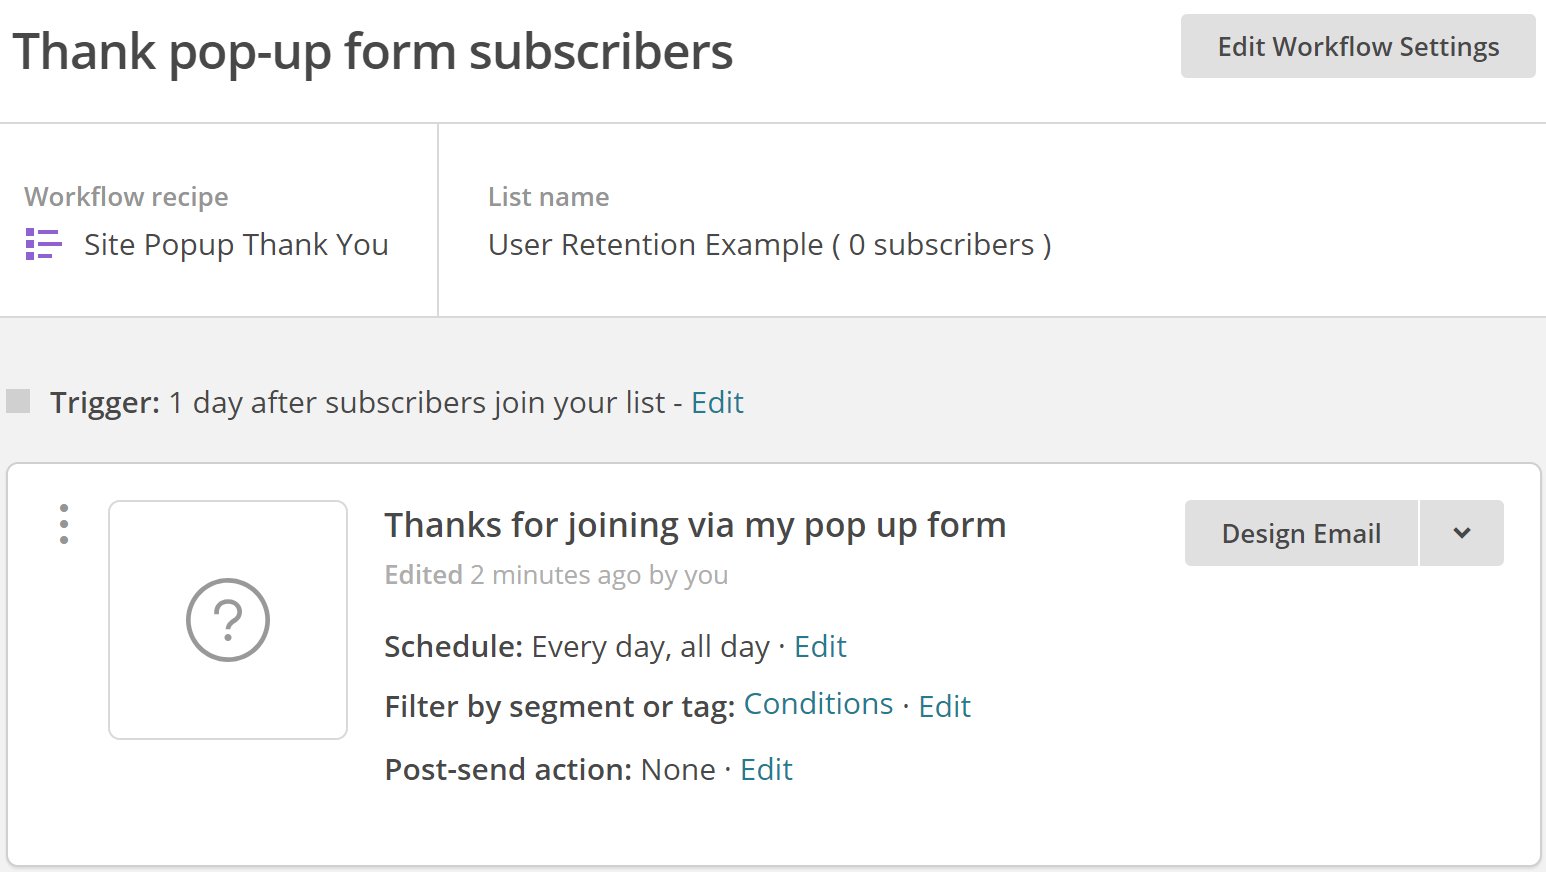 Configuring your automation in MailChimp